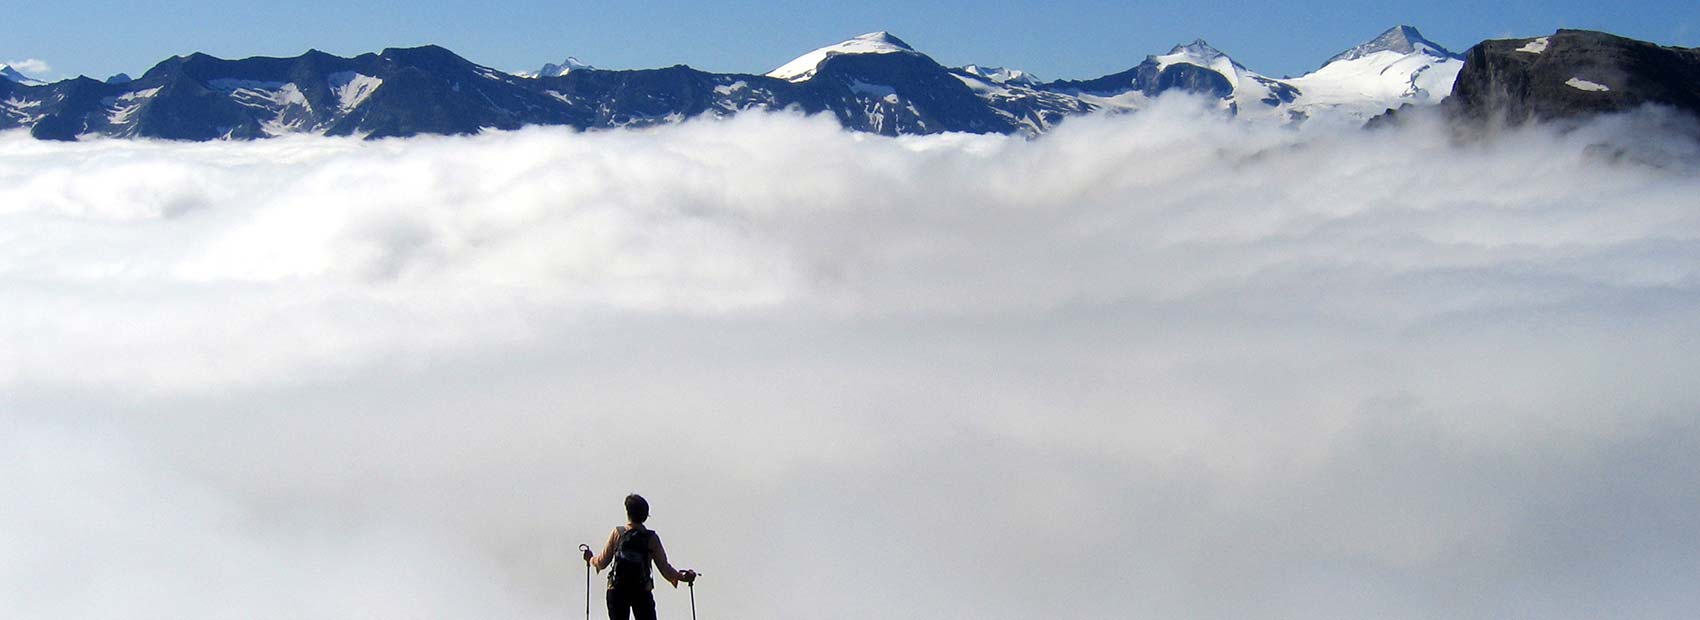 above the clouds the freedom is boundless